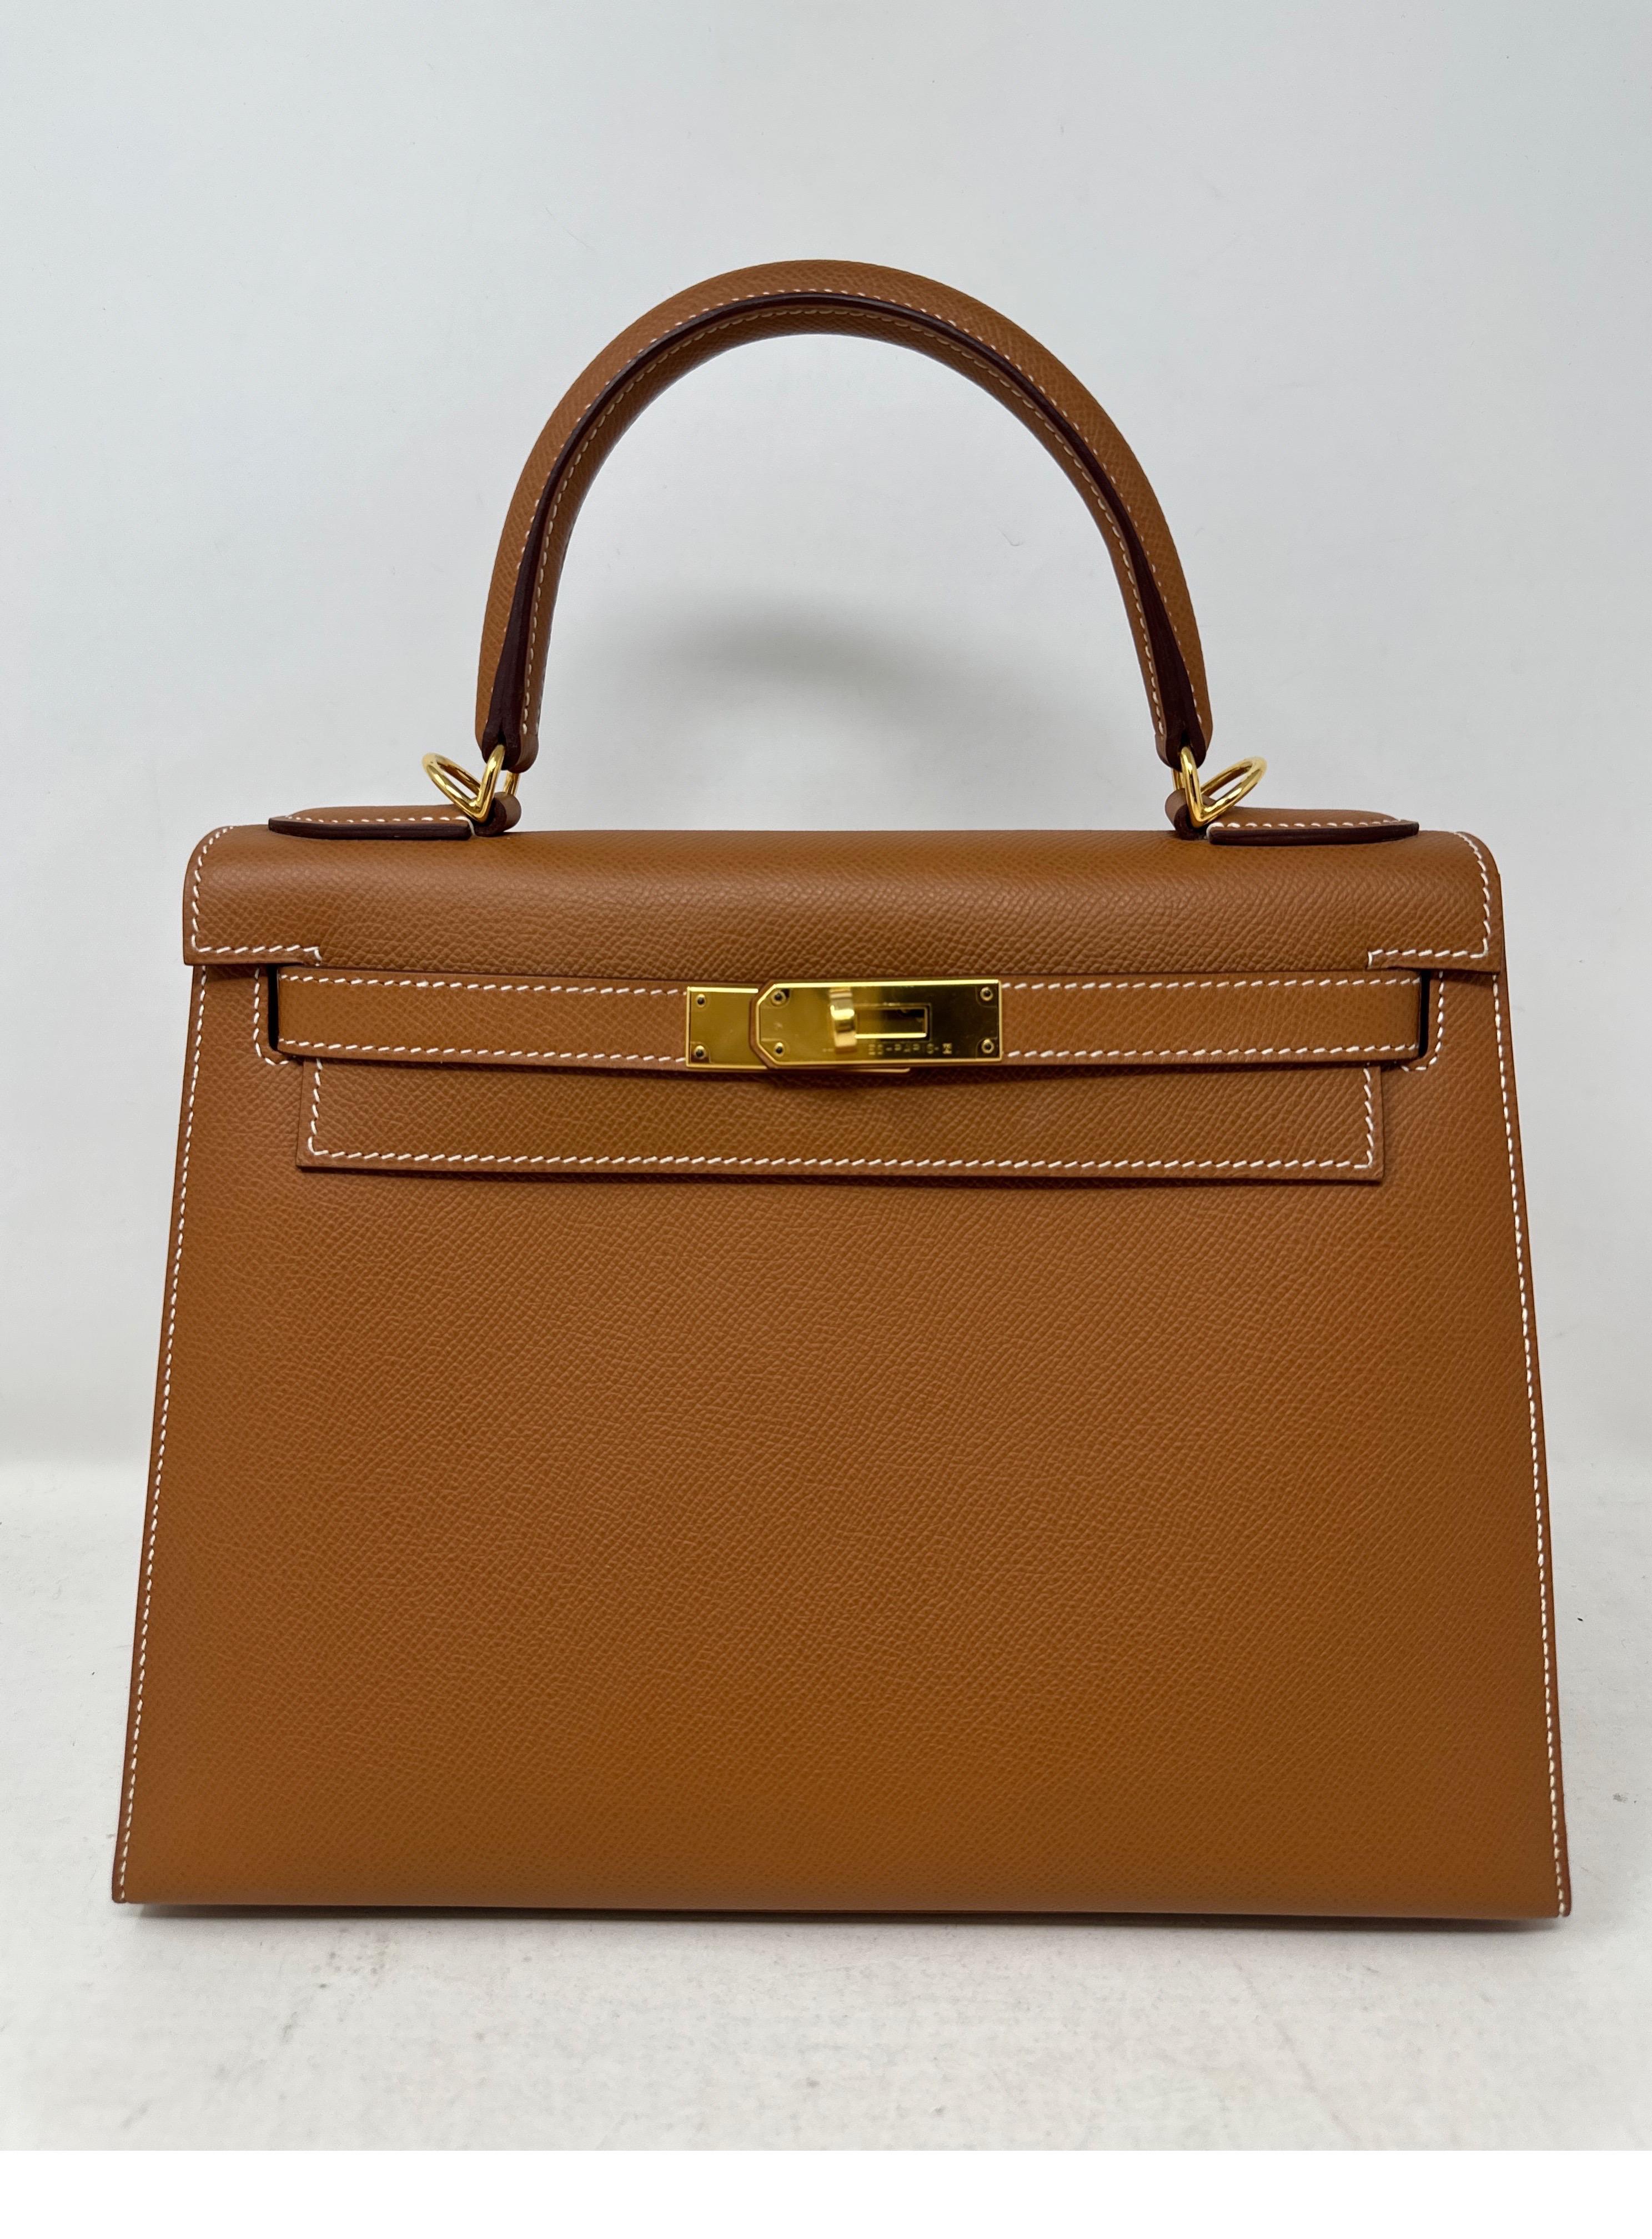 Hermes Gold Kelly 28 Sellier Bag In Excellent Condition For Sale In Athens, GA